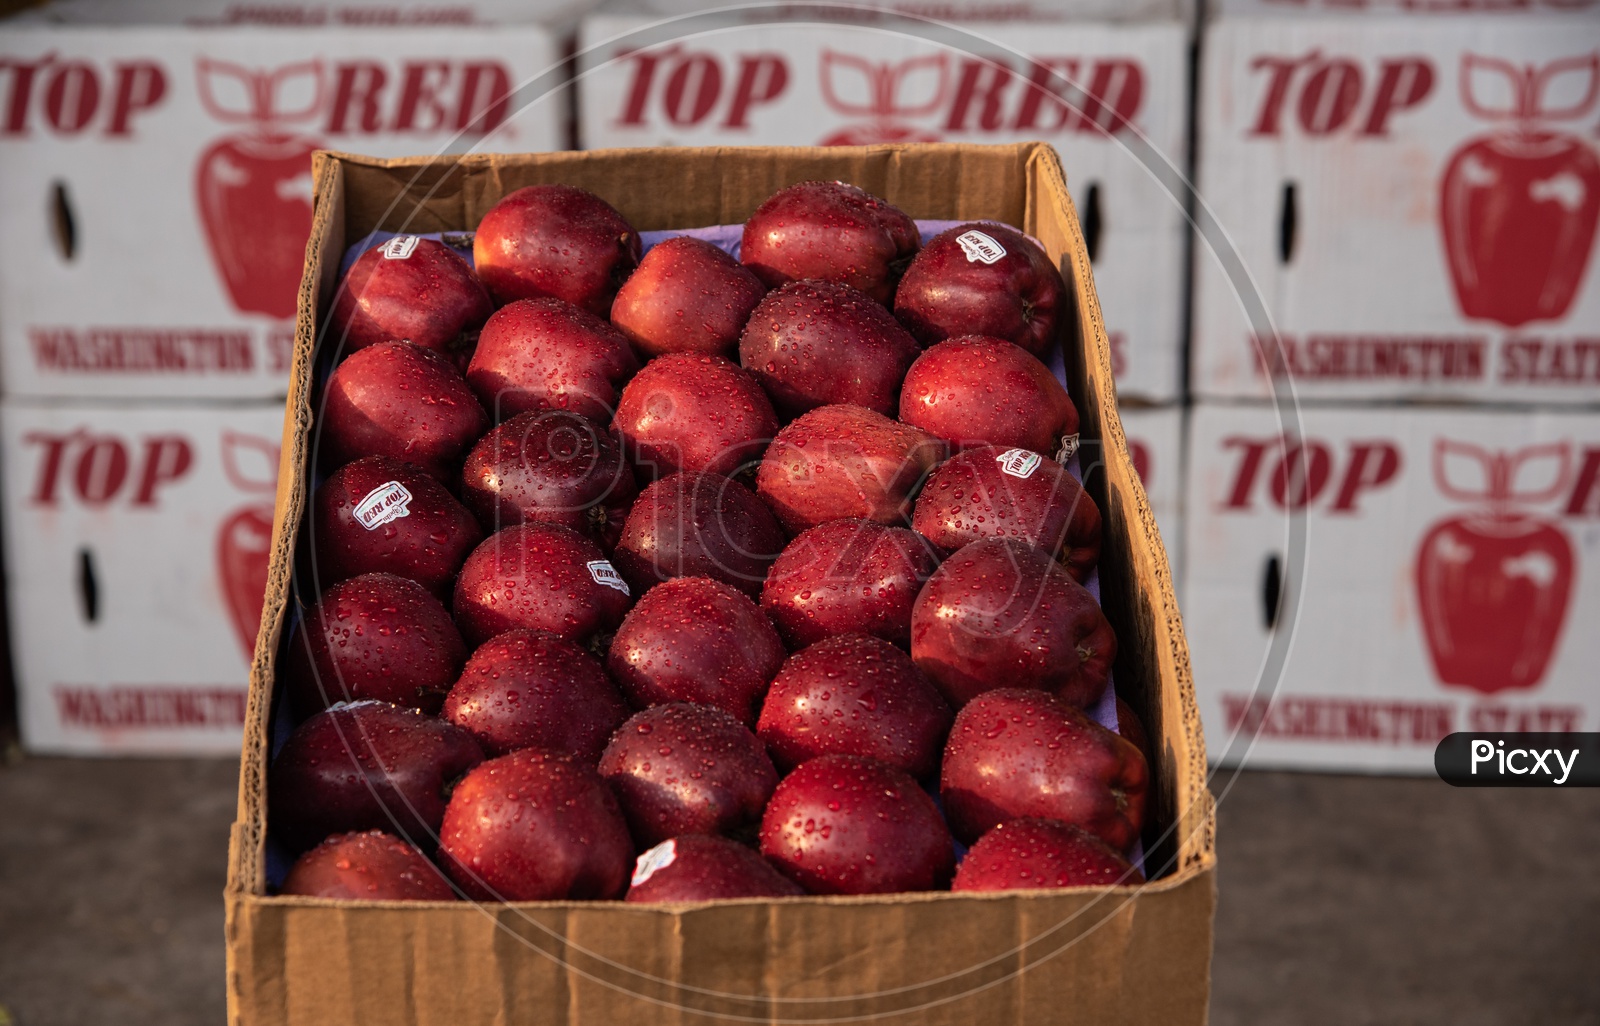 Top Red Brand Red Washington Apples